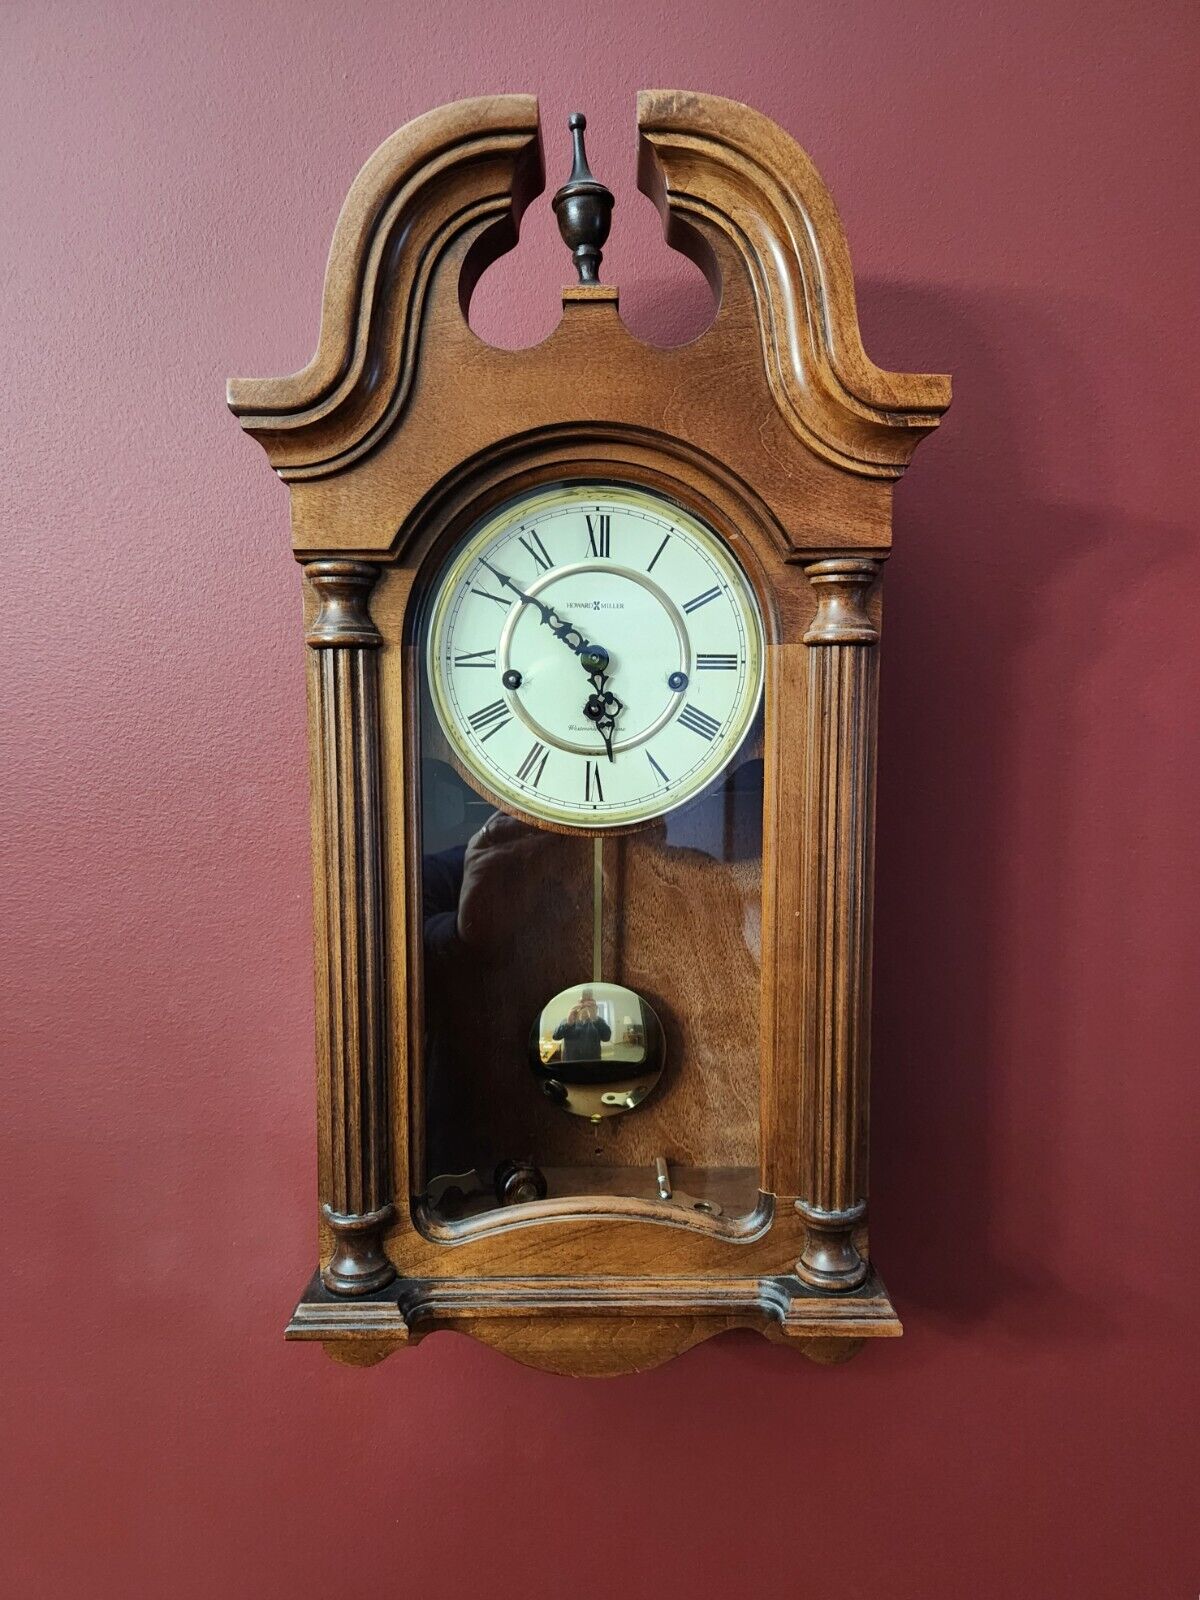 Howard Miller wall clock with Westminster chime.